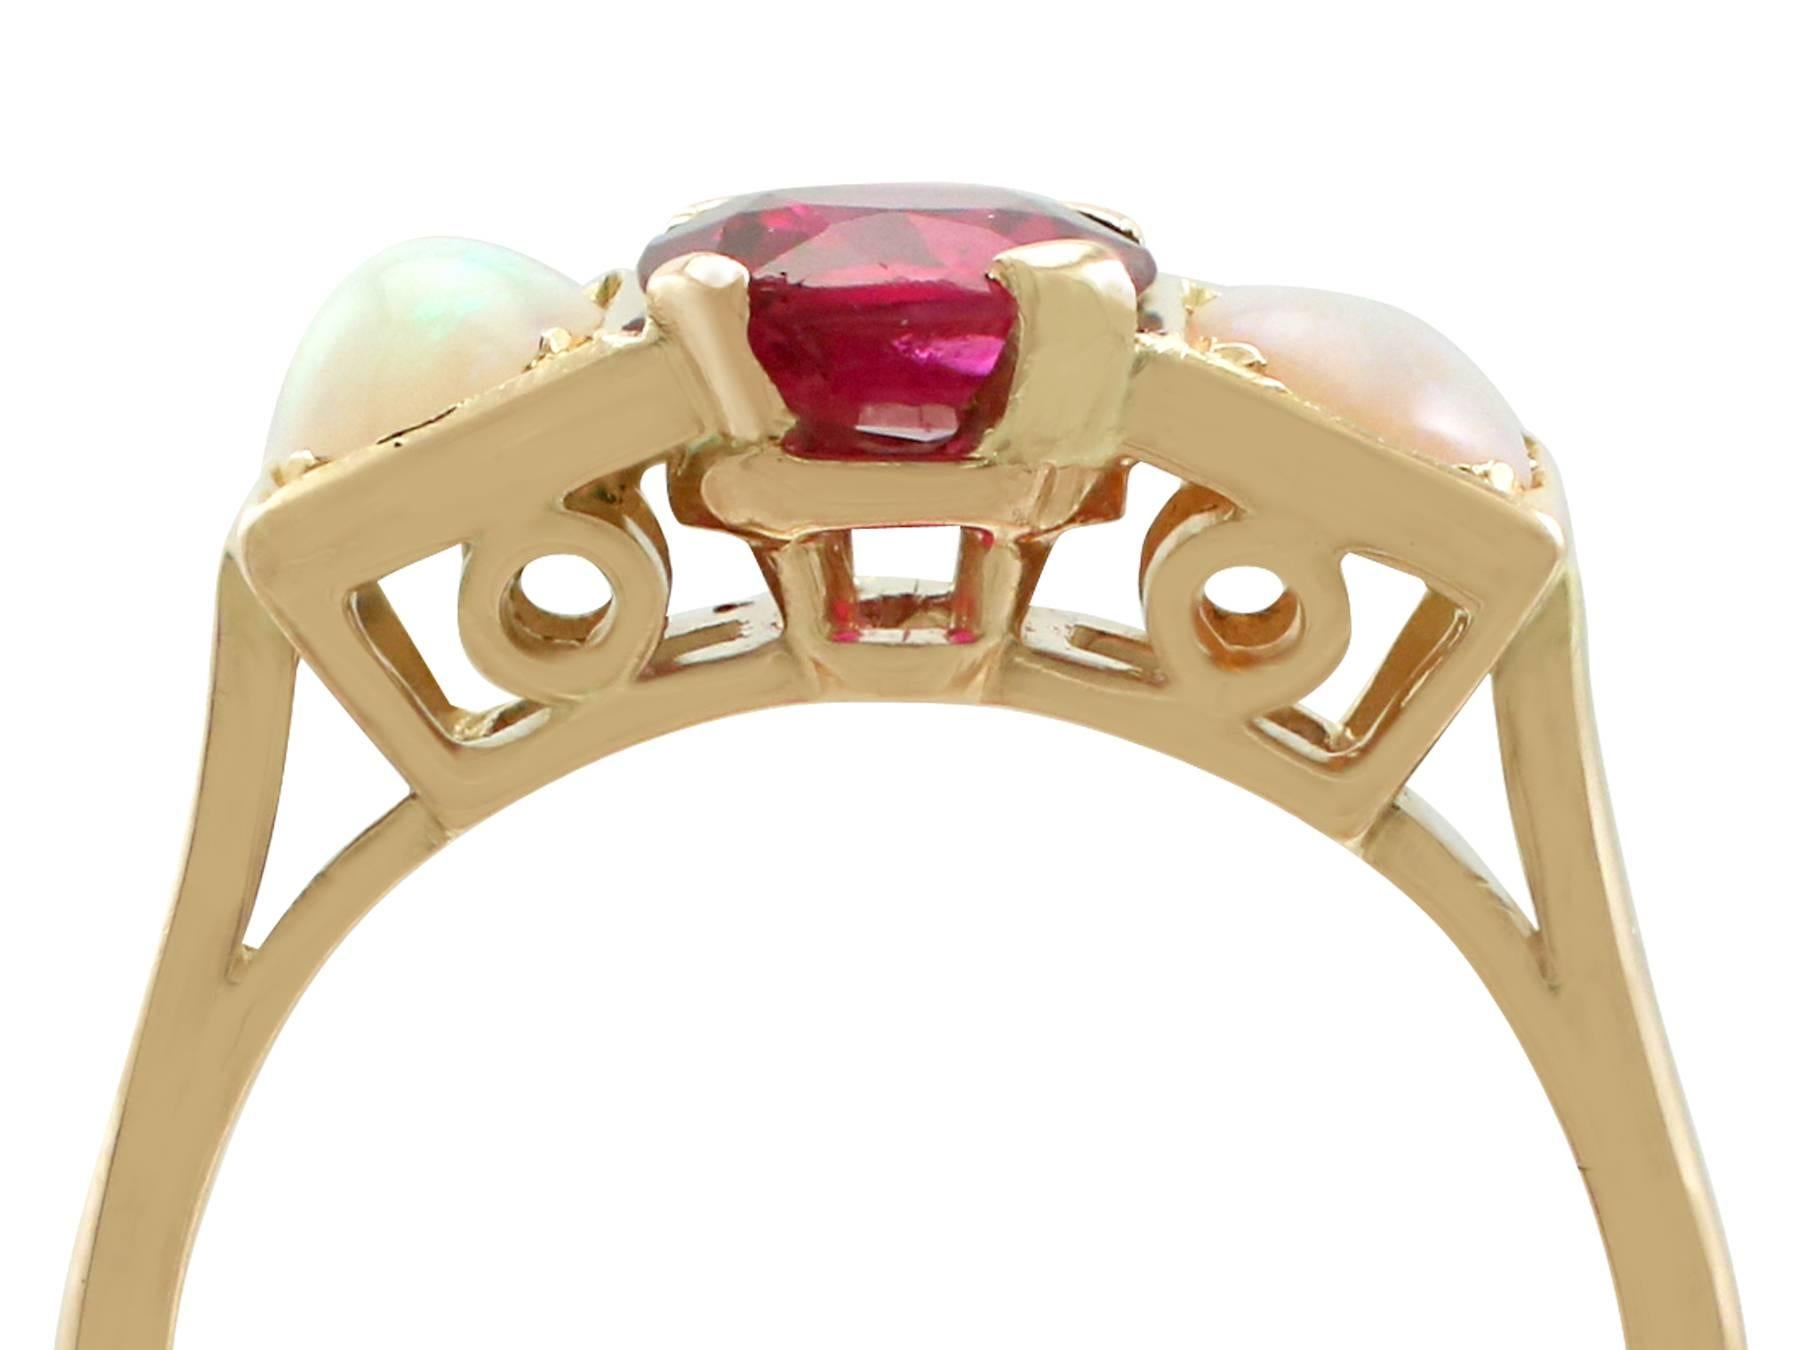 An impressive vintage French 1.86 carat ruby and 0.80 carat opal, 18 karat yellow gold dress ring; part of our diverse gemstone jewellery collections.

This fine and impressive vintage opal and ruby ring has been crafted in 18k yellow gold.

The